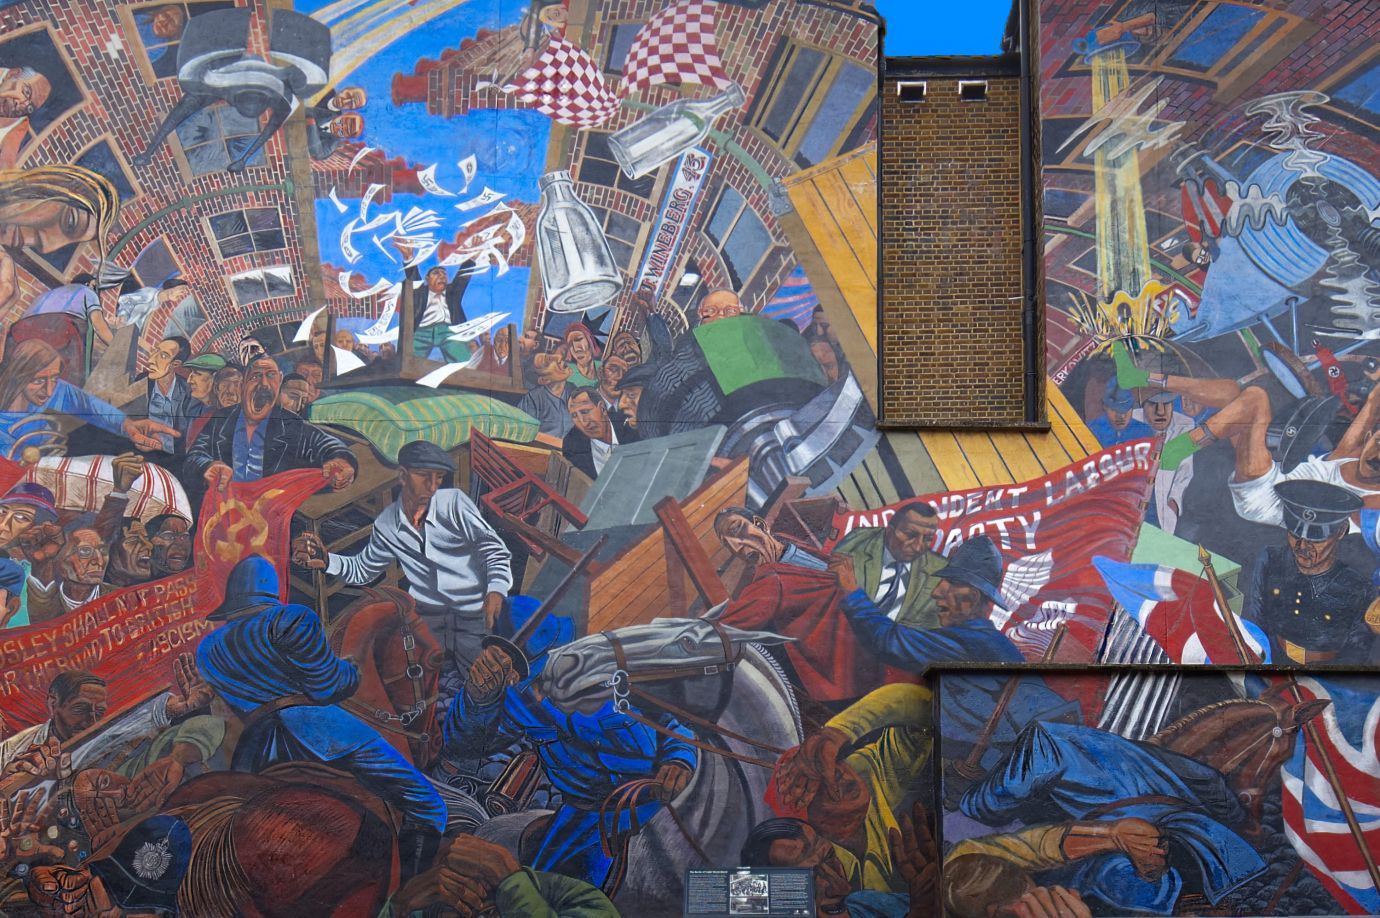 Mural-Battle-of-Cable-Street-London-2652-04092022